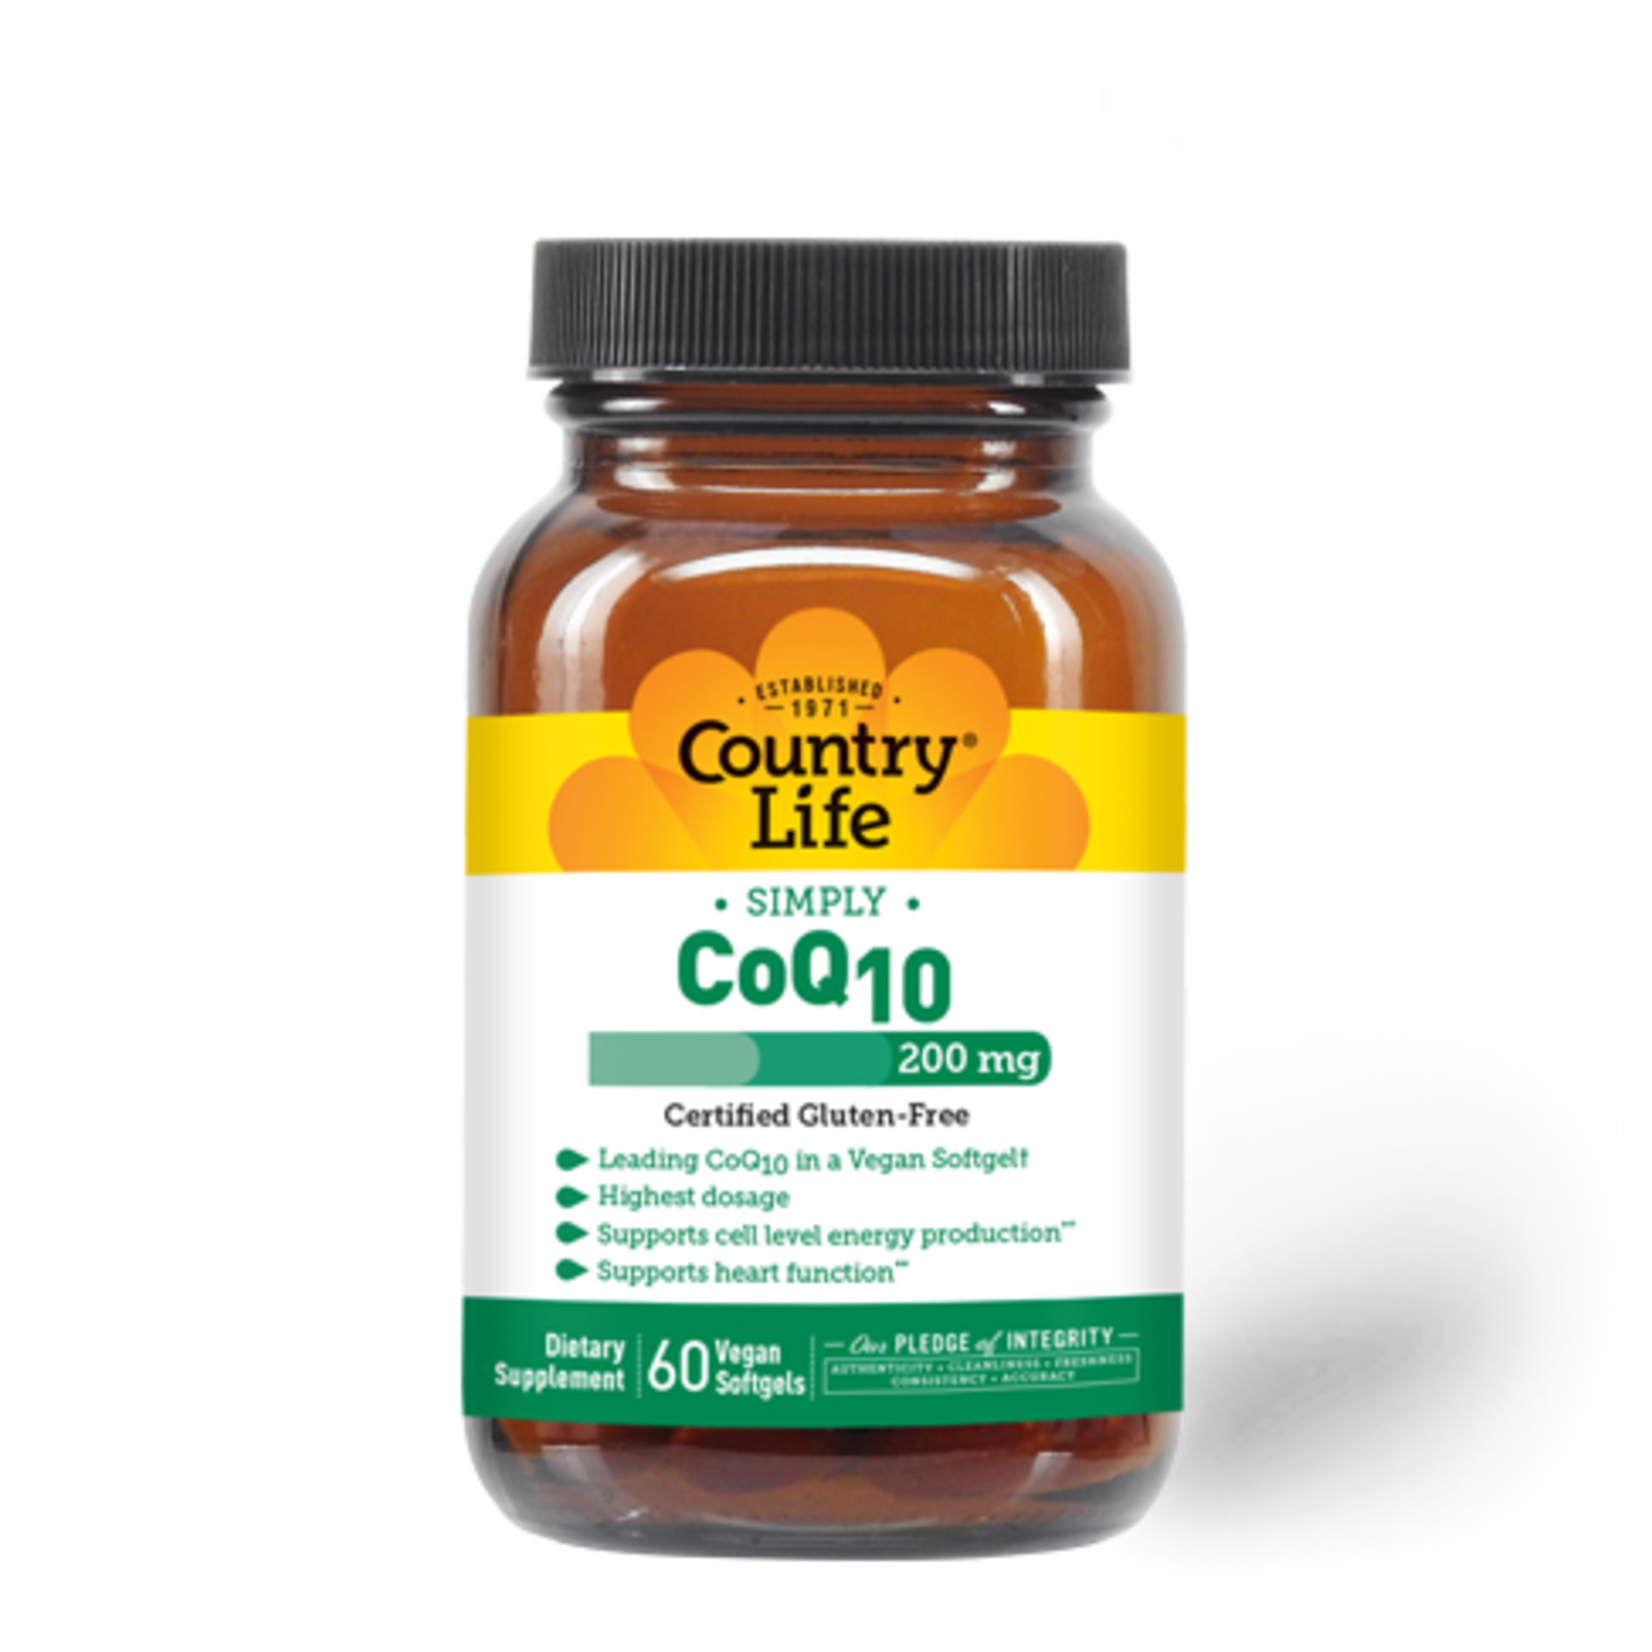 Country Life Country Life - Coq10 200 mg - 60 Veg Capsules